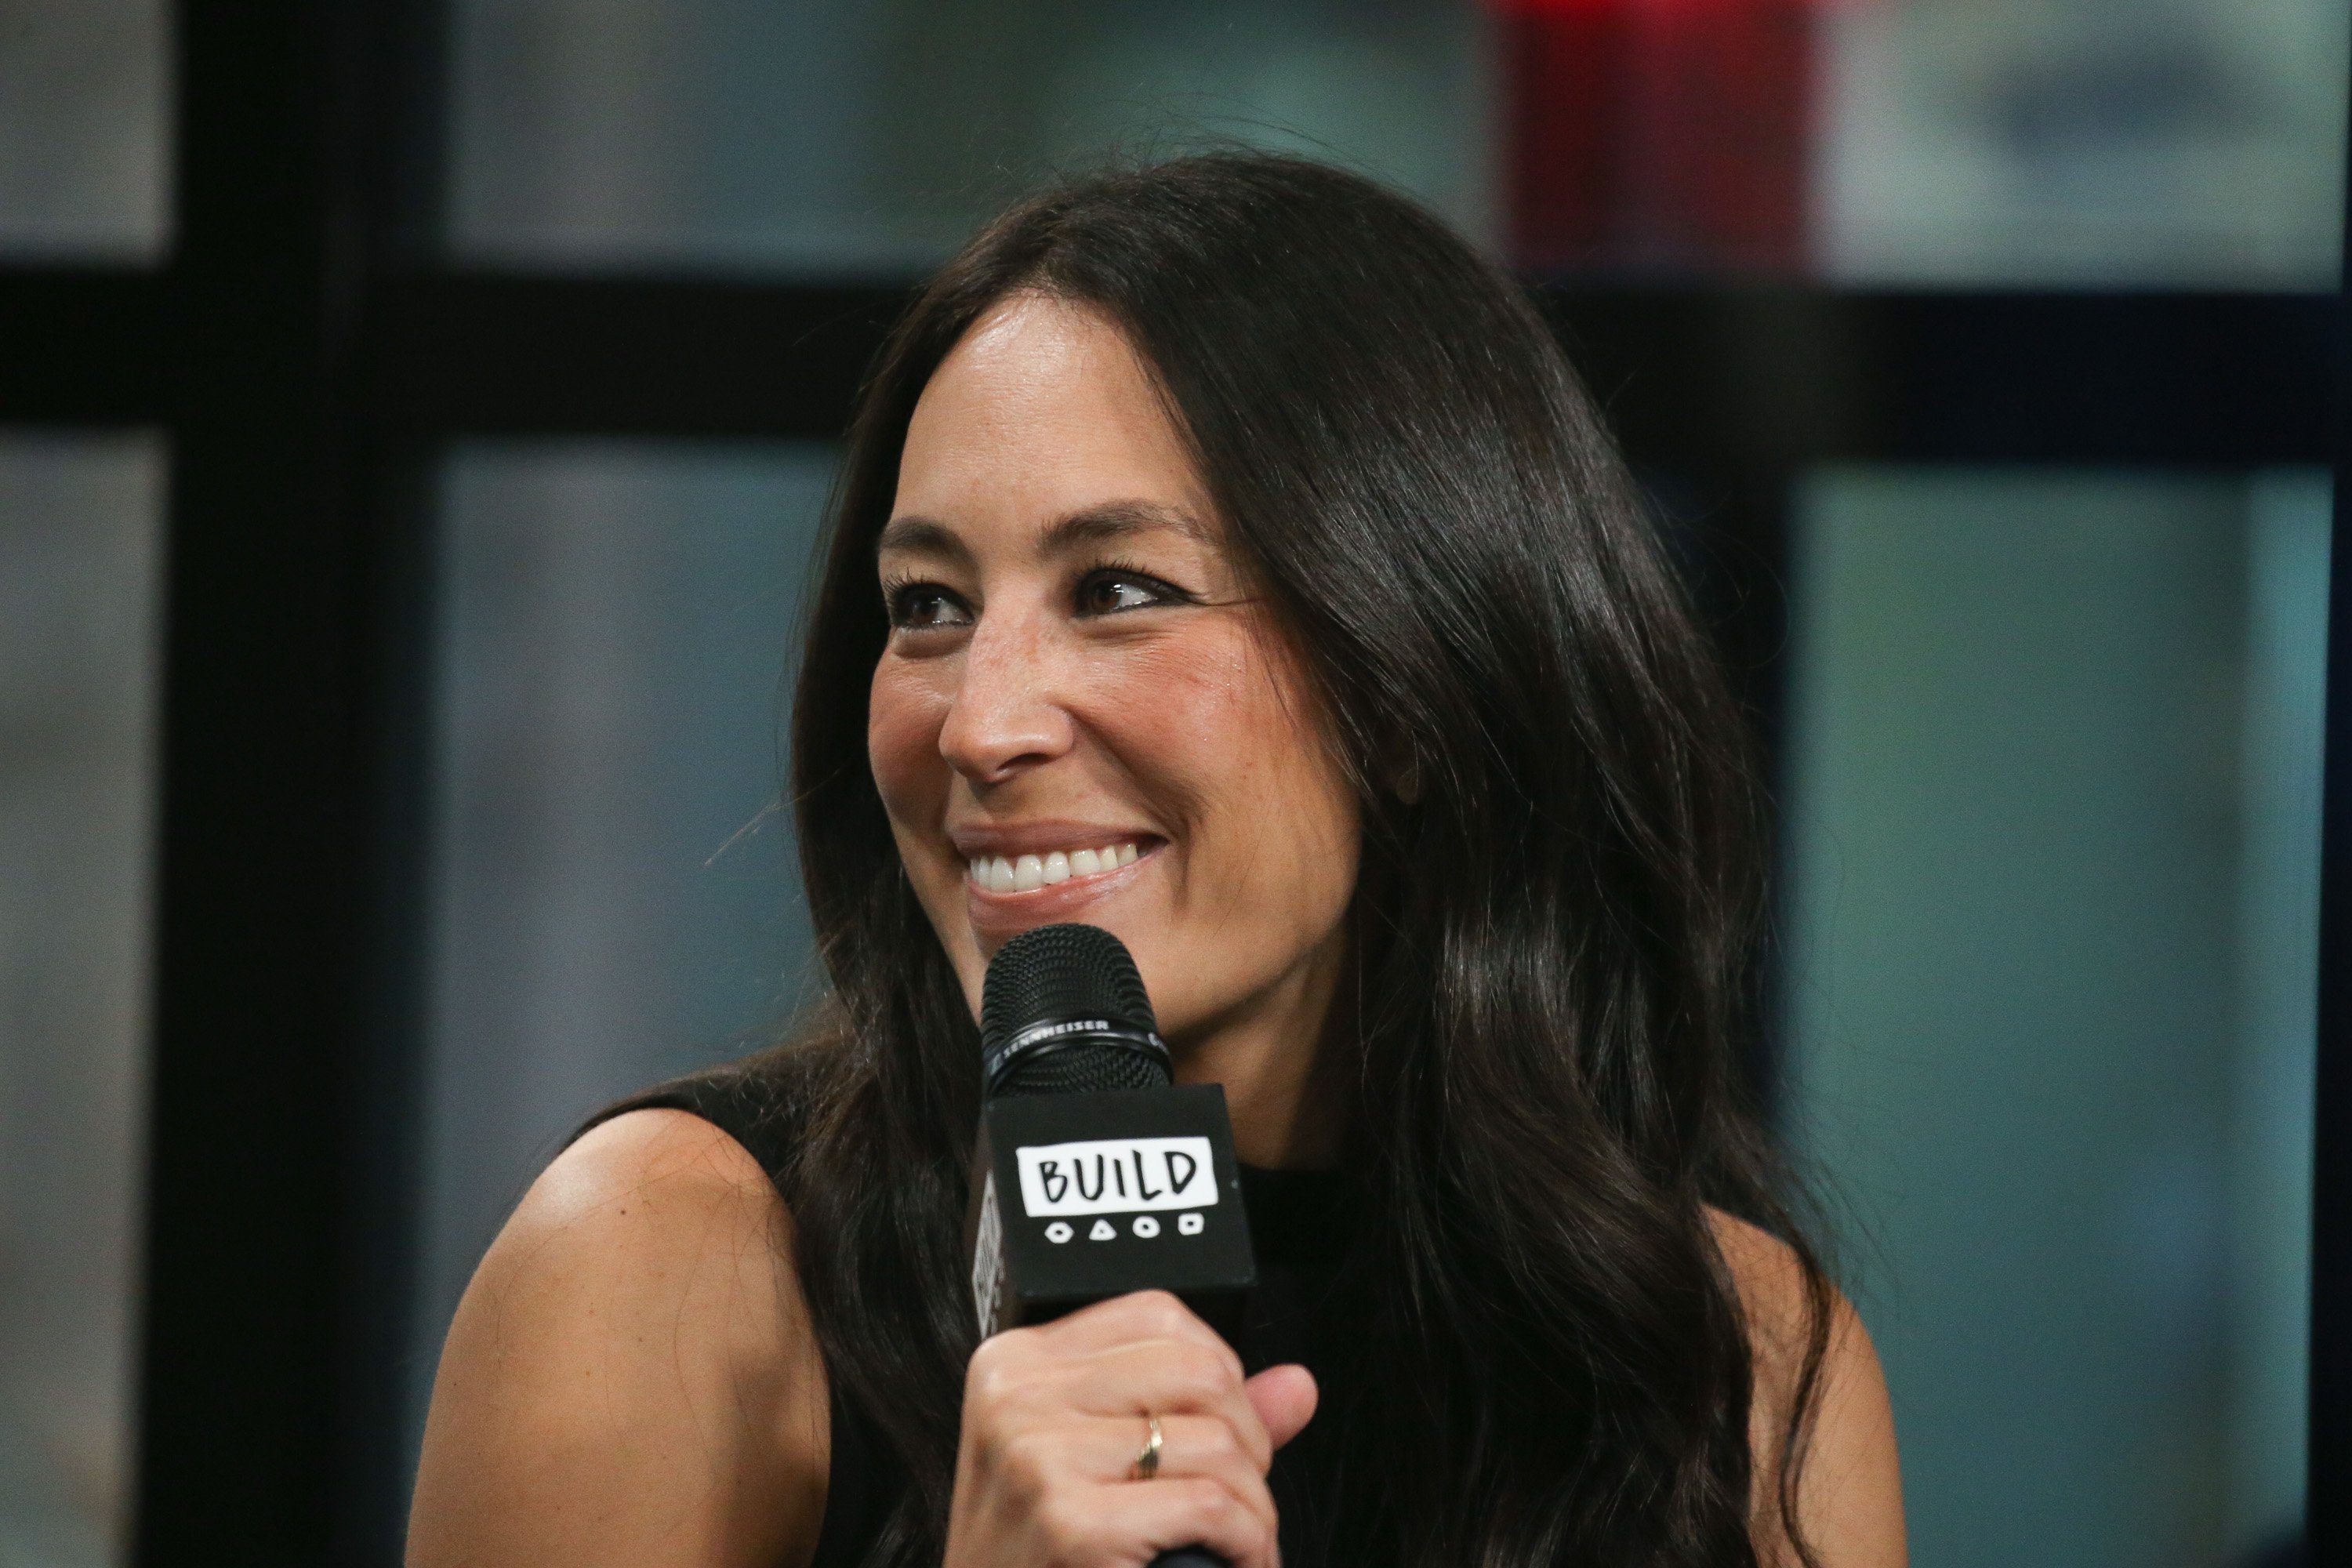 Joanna Gaines discusses new book, "Capital Gaines: Smart Things I Learned Doing Stupid Stuff" at Build Studio on October 18, 2017. | Photo: GettyImages